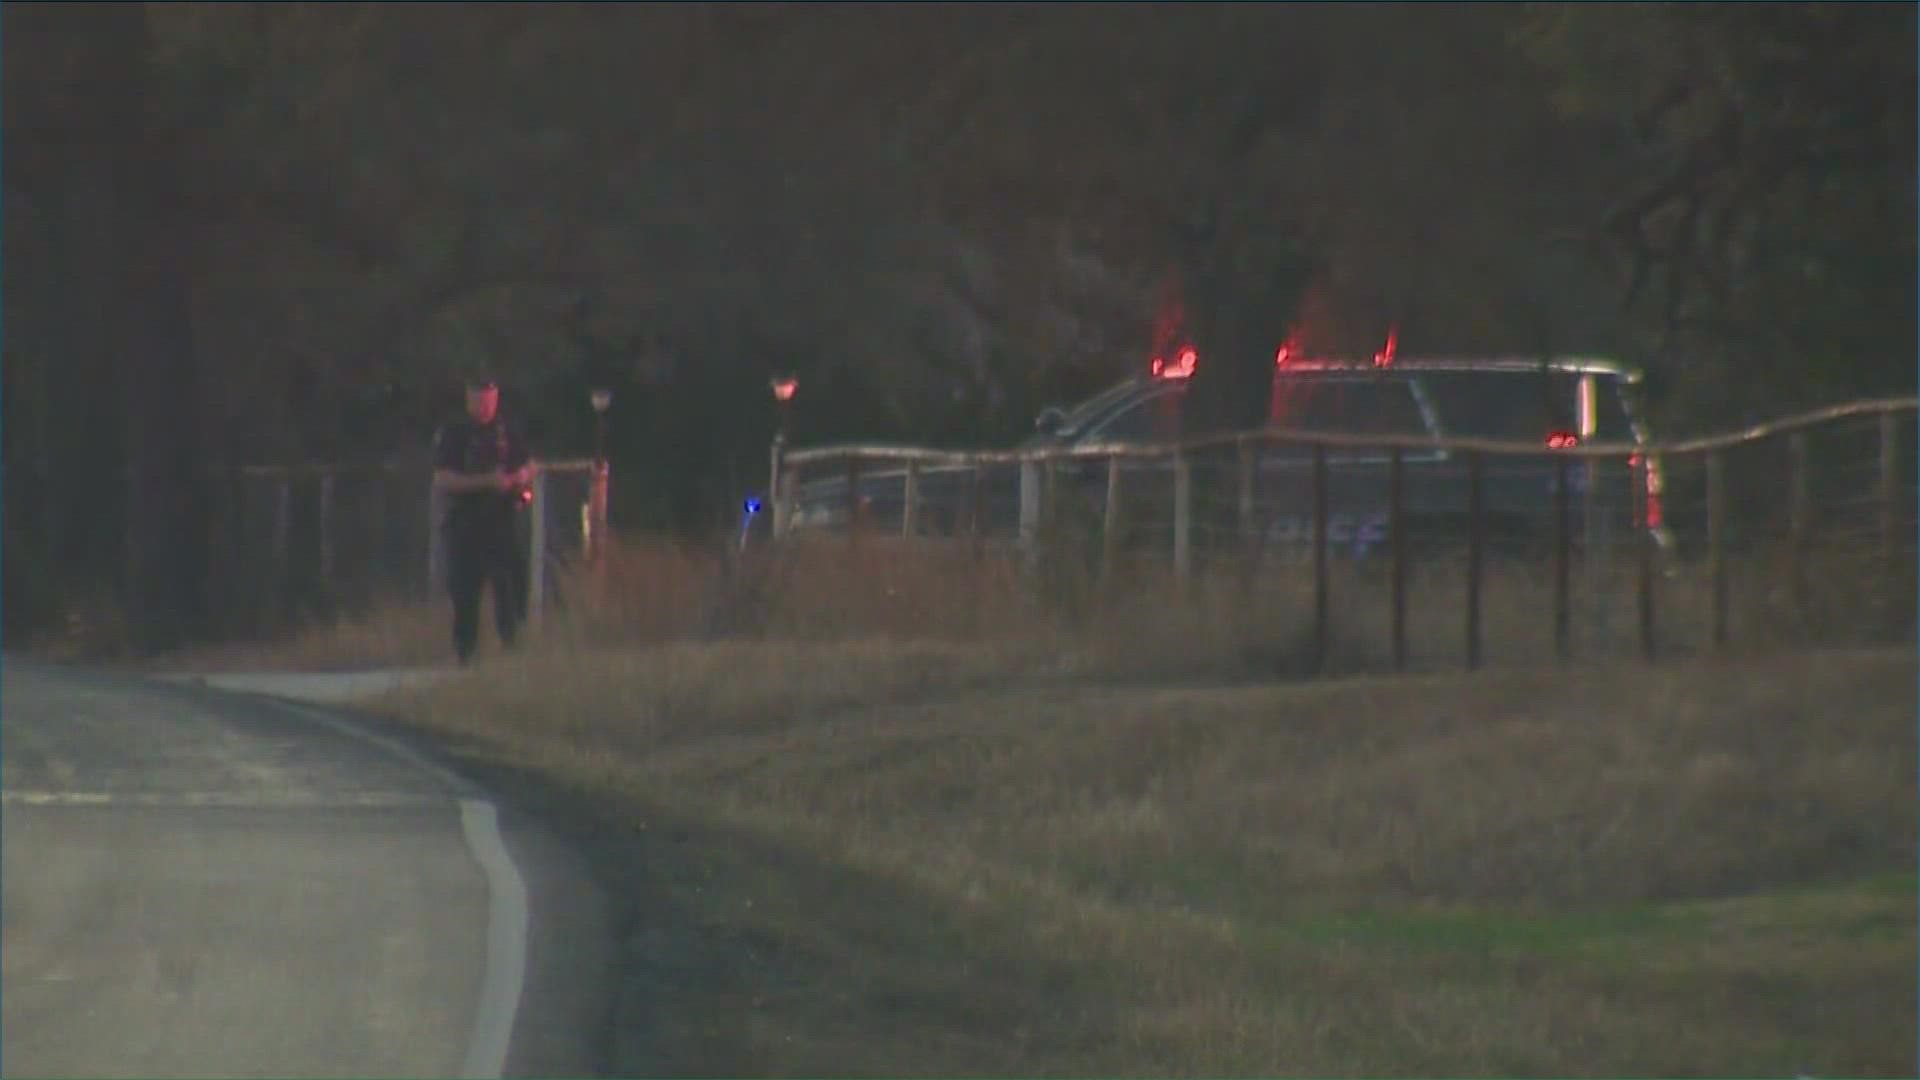 Law enforcement is investigating after a Liberty Hill police officer shot and killed a suspect on Wednesday afternoon.